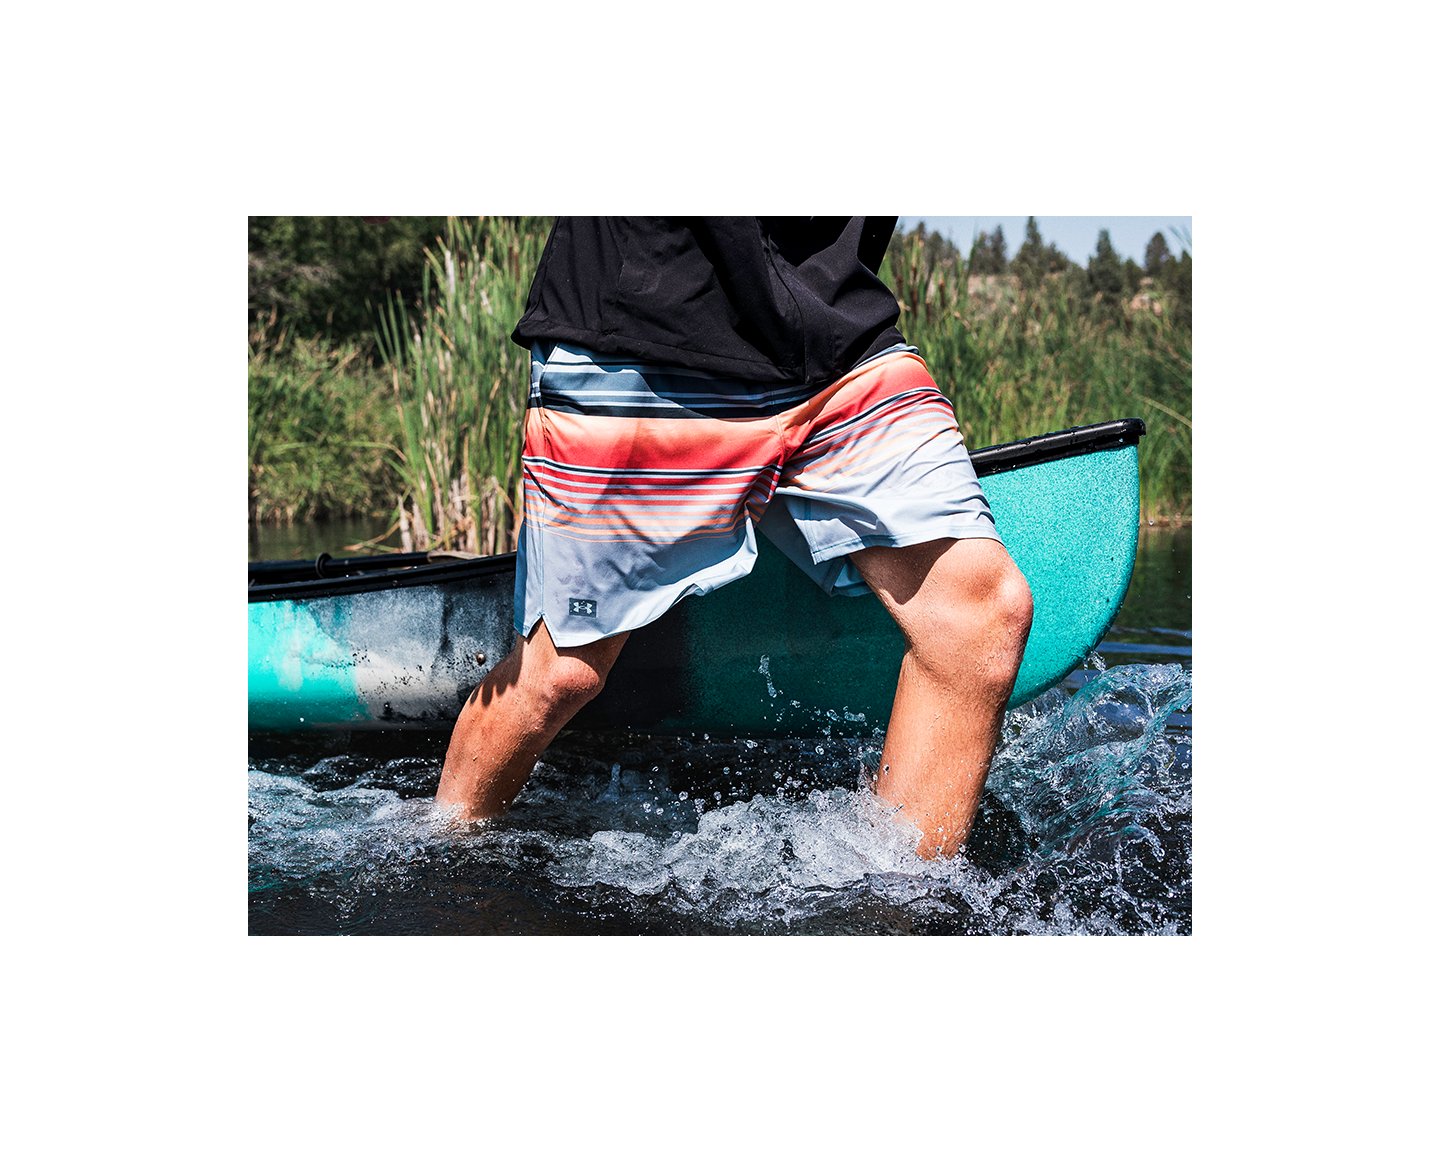 https://underarmour.scene7.com/is/image/Underarmour/SS23_OUTDOOR_FISH_IsoChill_2-in-1_Boardshorts_5_4_2?qlt=85&wid=1440&hei=1152&size=1440,1152